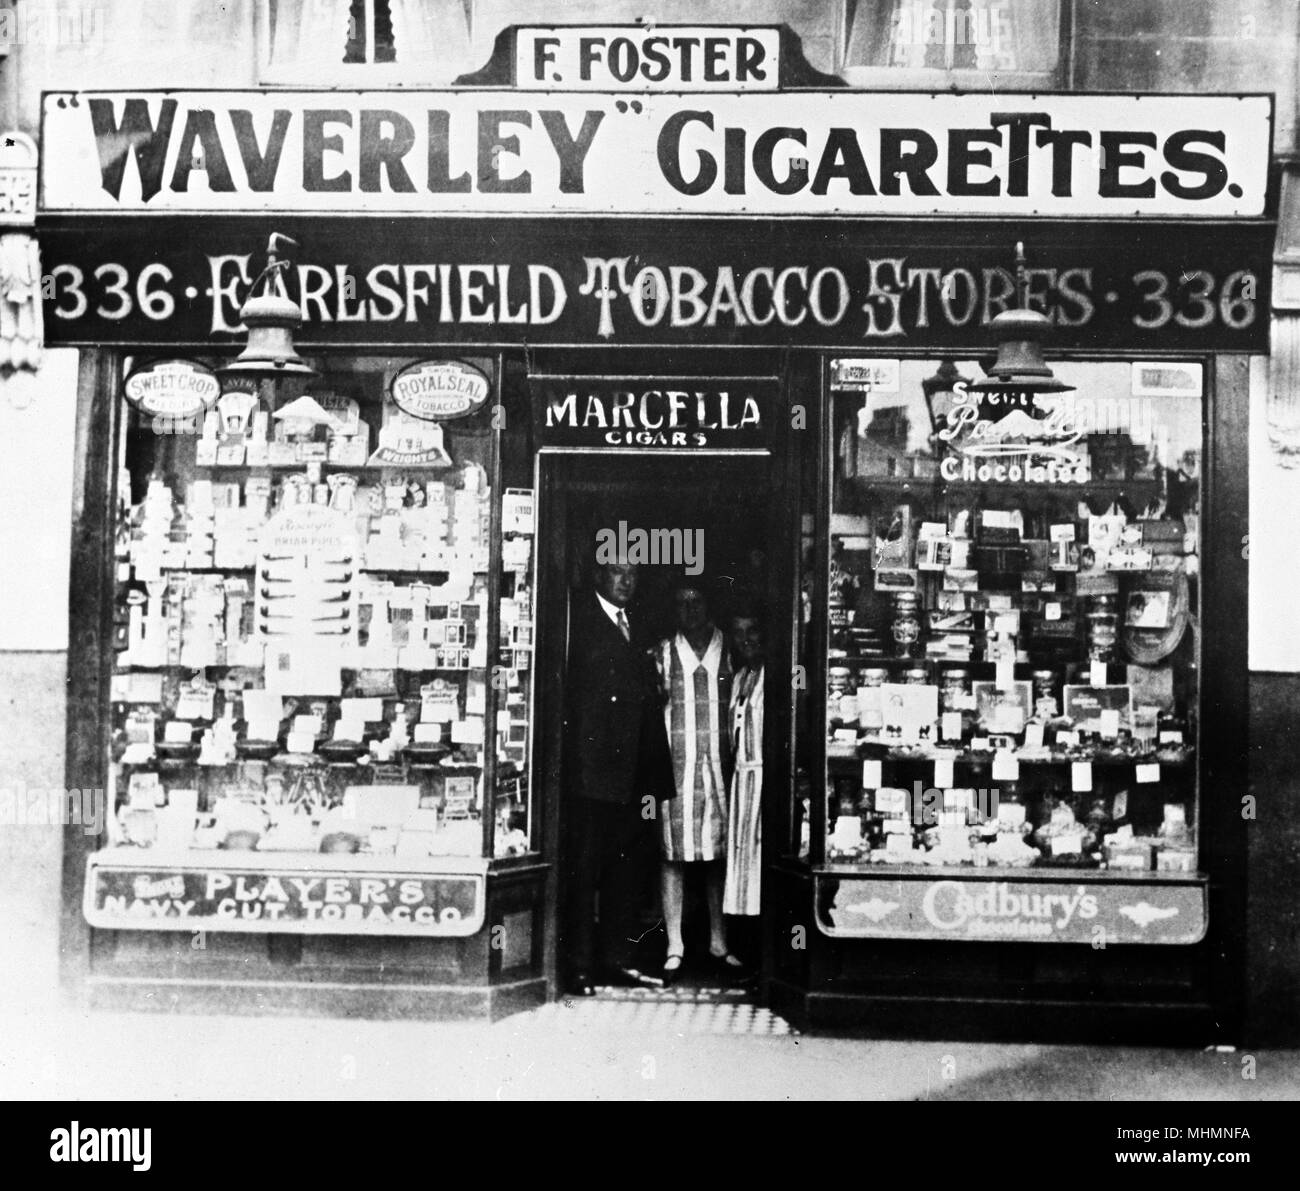 F Foster, Earlsfield Tobacco Stores, Wandsworth, SW London Stockfoto